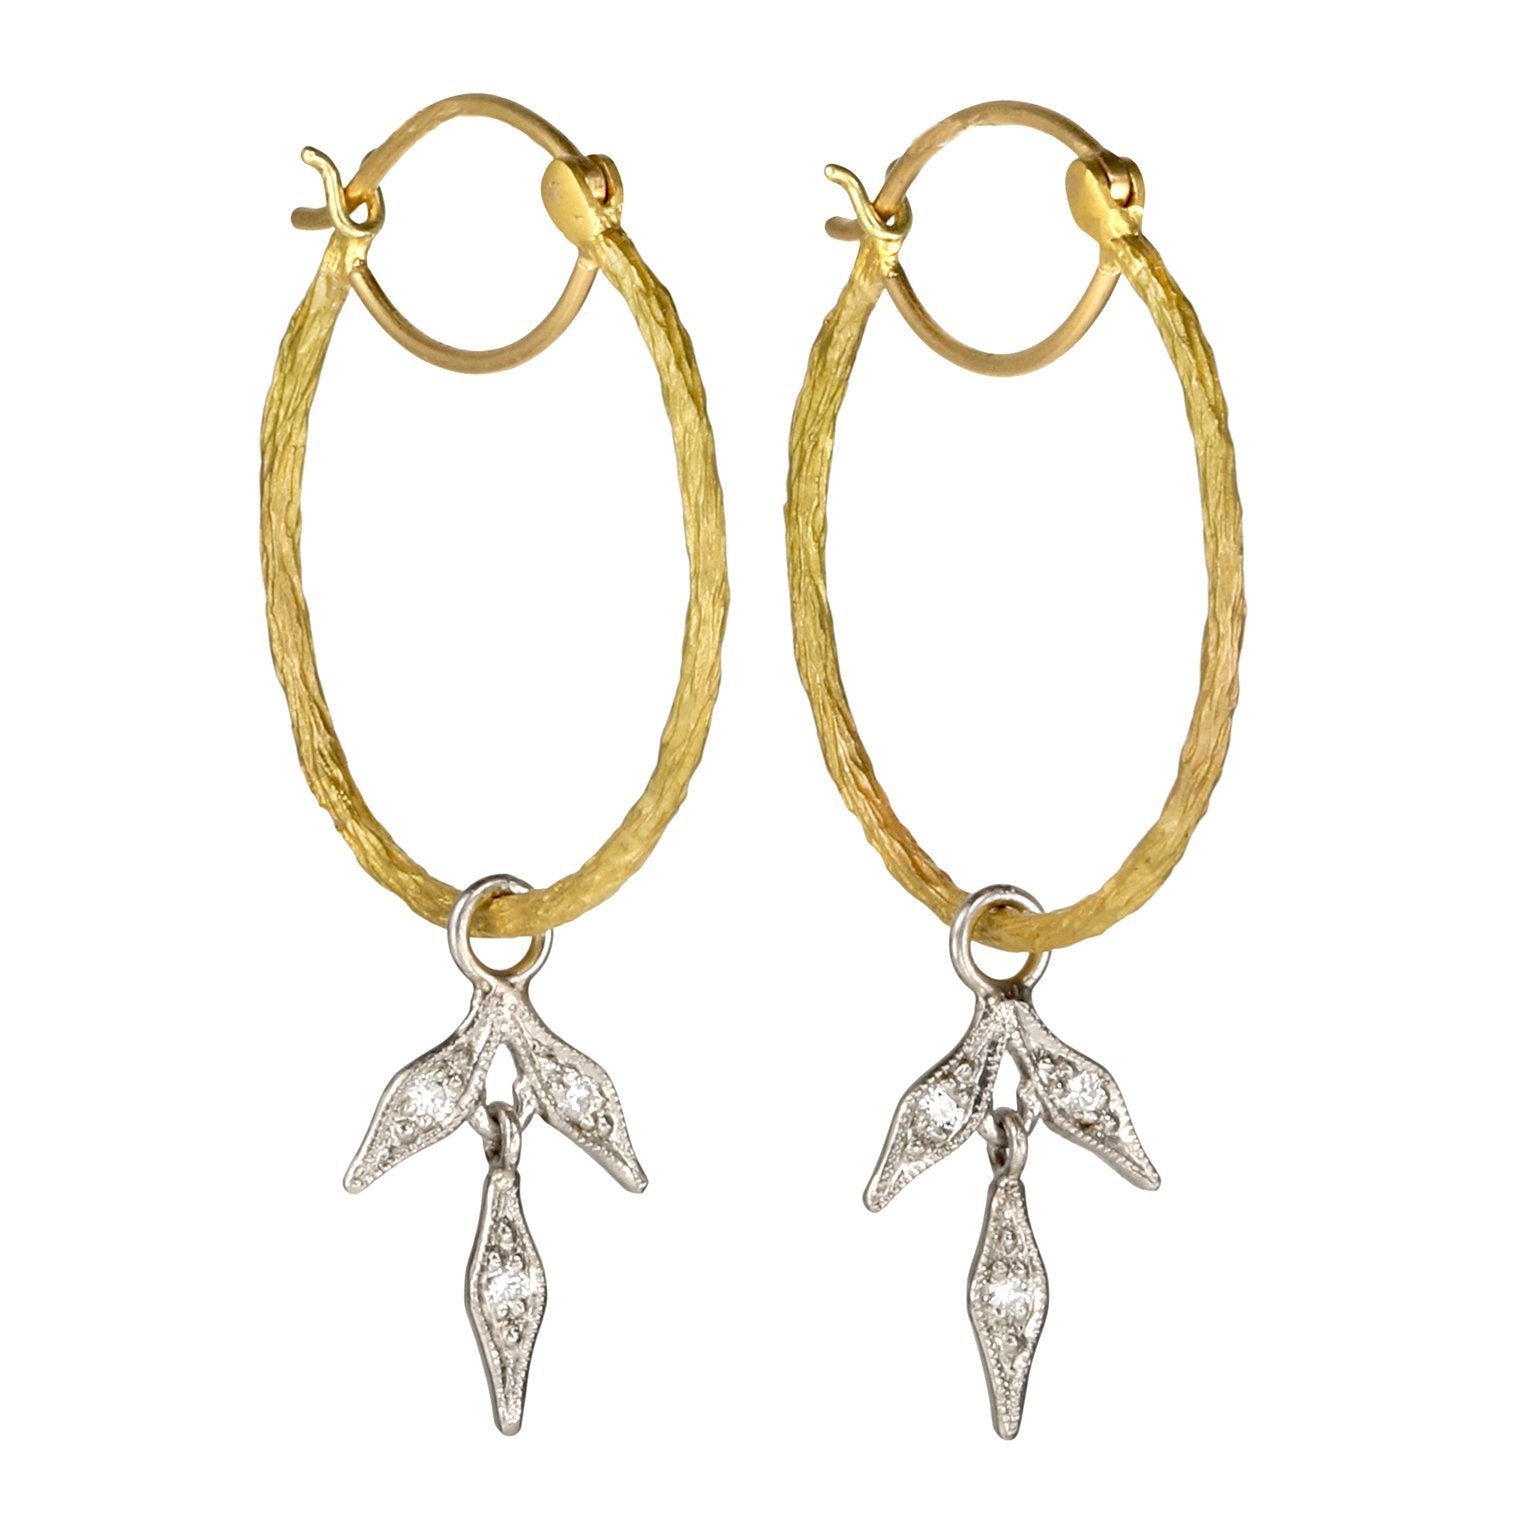 22K Gold Branched Hoop Earrings with Platinum &amp; Diamond Leaves